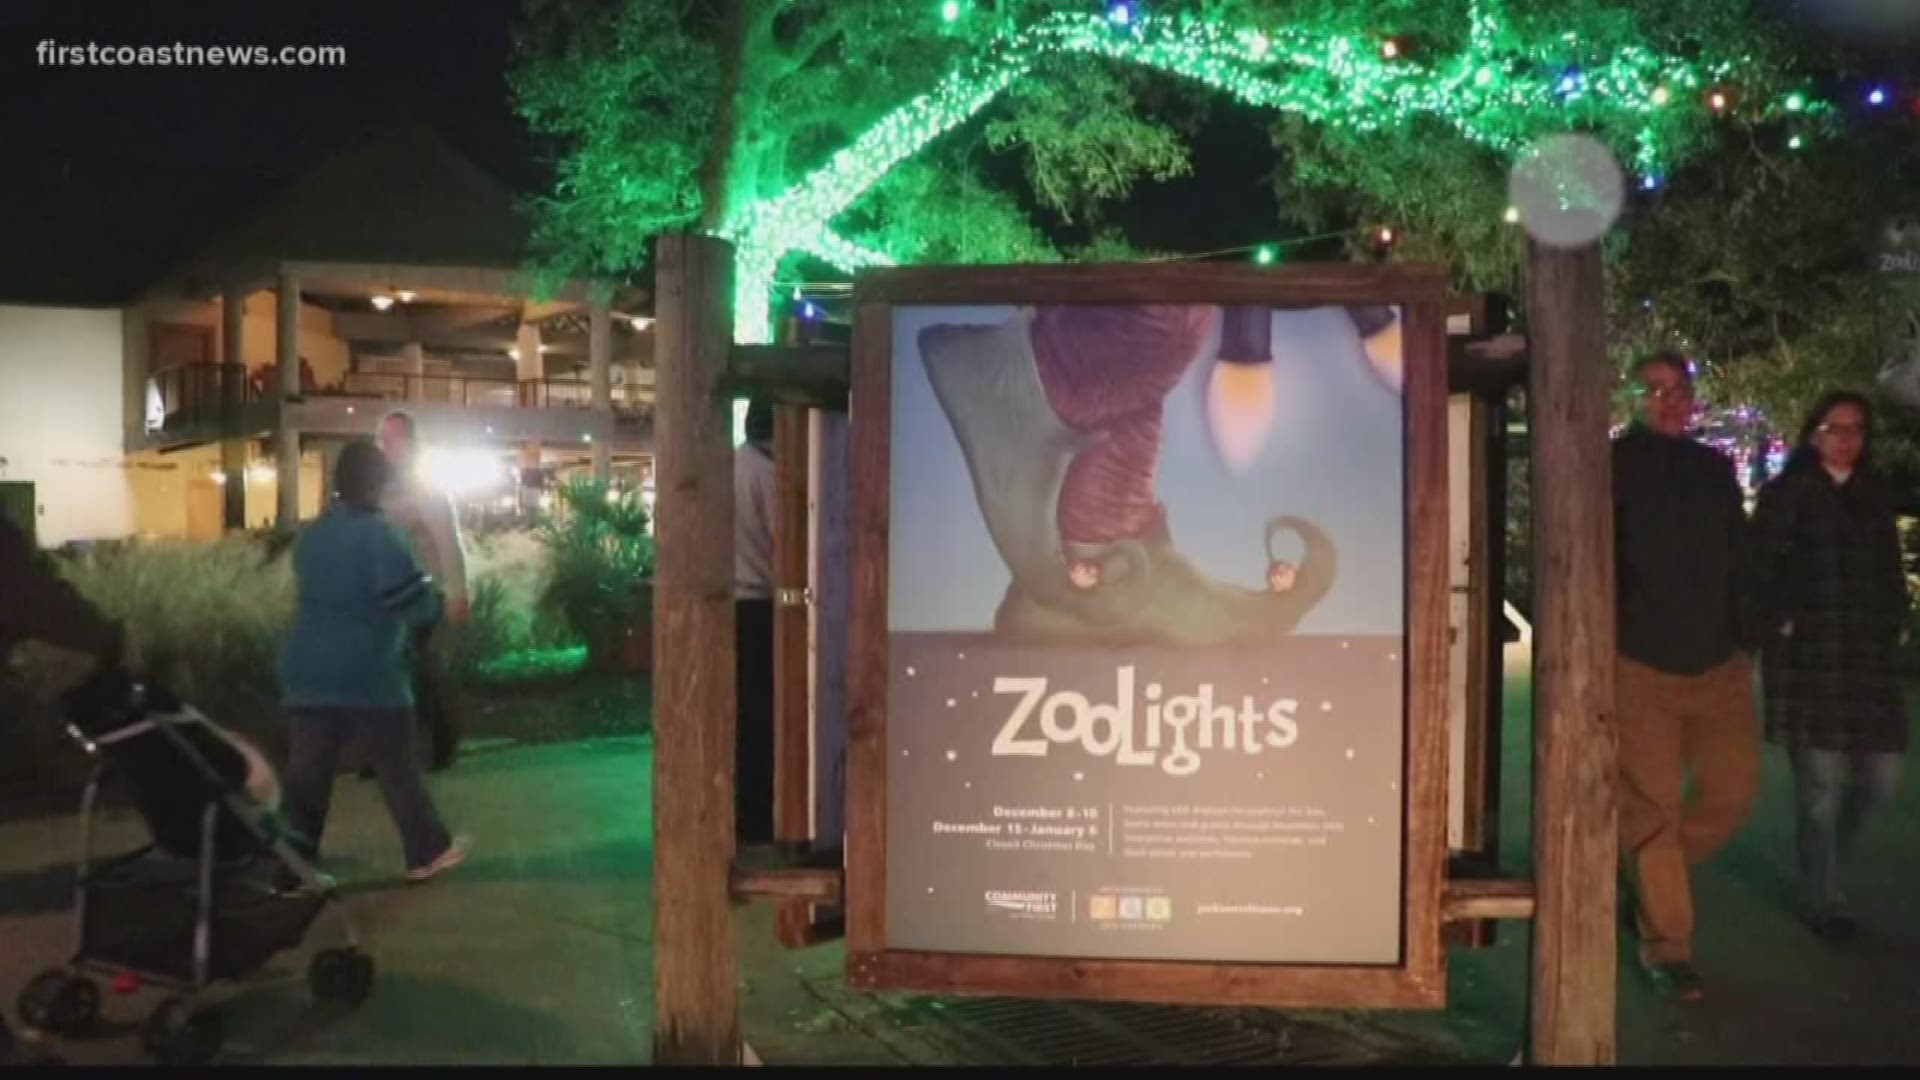 The zoo's luminous winter wonderland kicks off Dec. 6 and will run every Thursday through Sunday in December from 6 p.m. to 10 p.m.